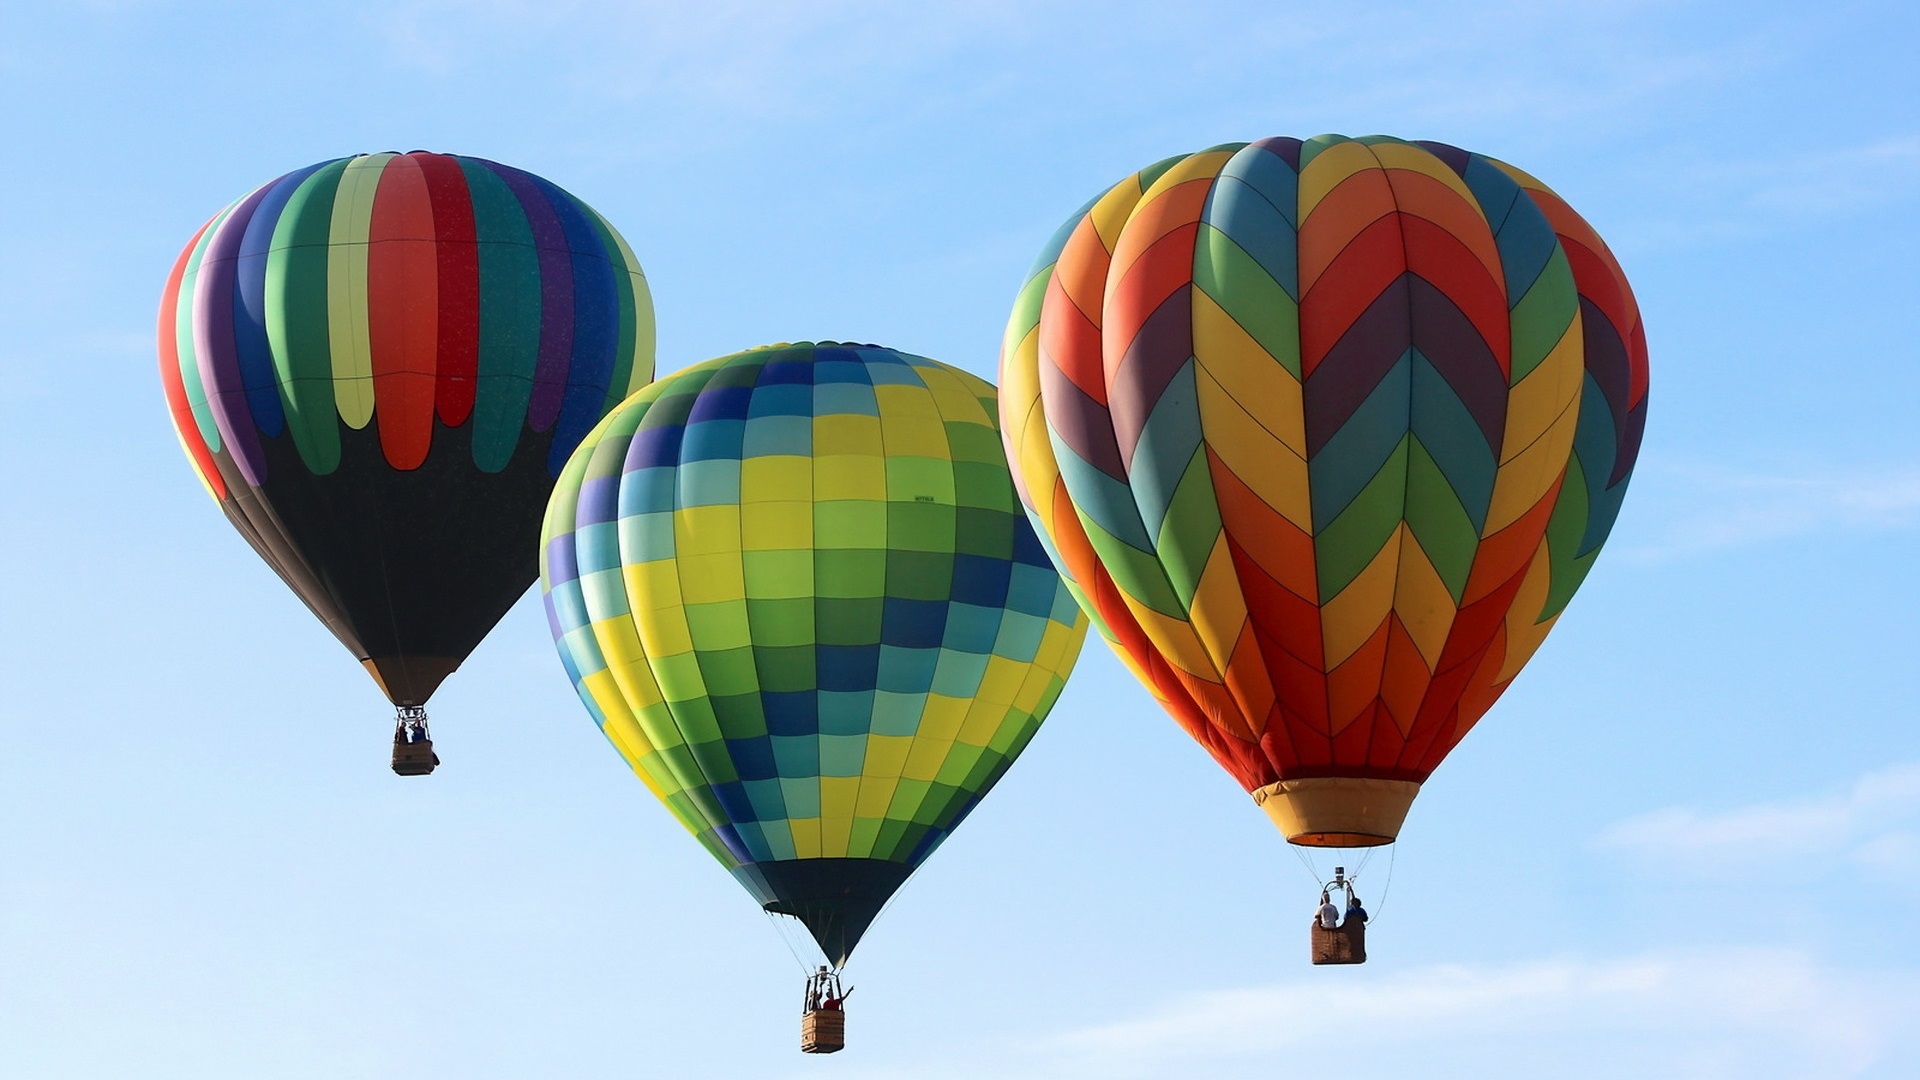 General 1920x1080 balloon flying sky colorful vehicle hot air balloons